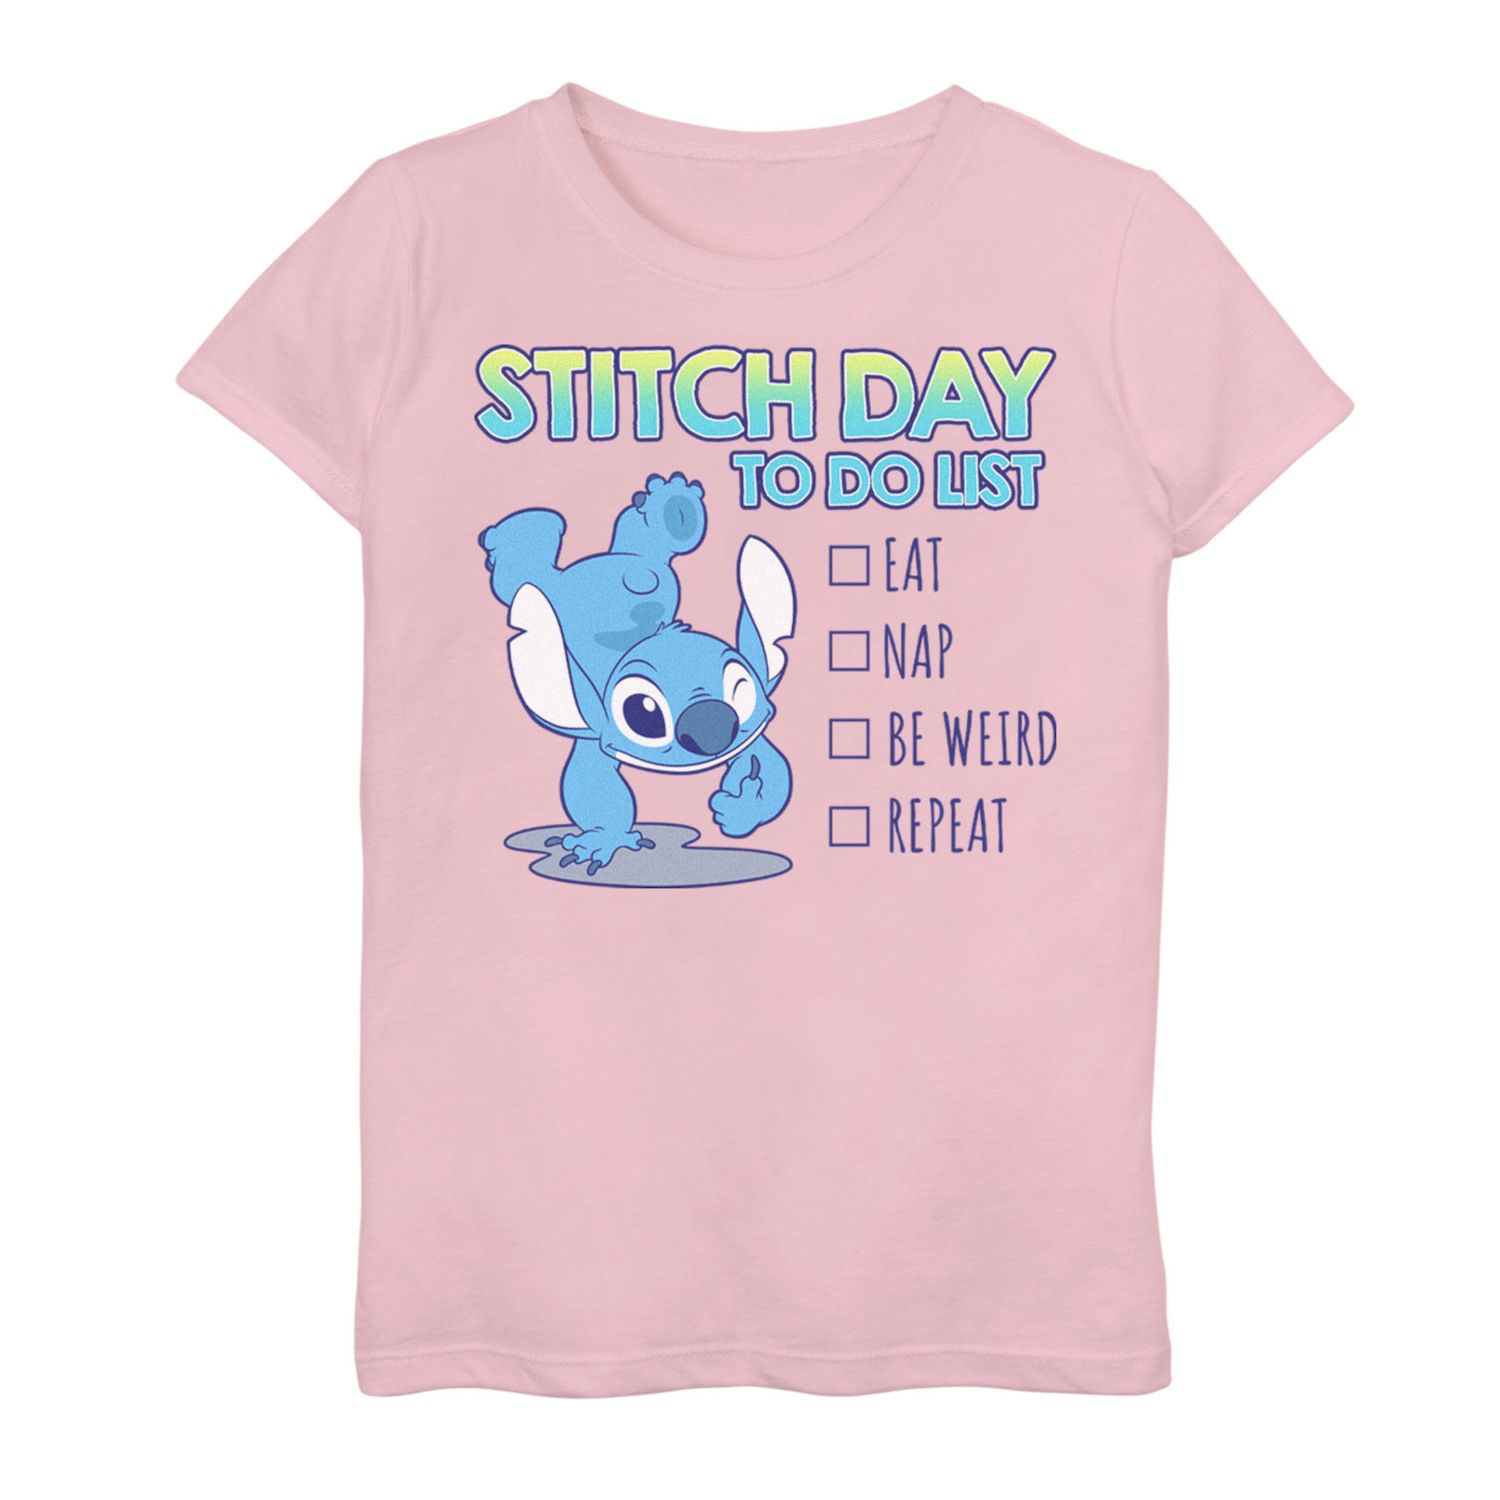 Image for Disney s Lilo & Stitch Girls 7-16 To Do List Tee at Kohl's.